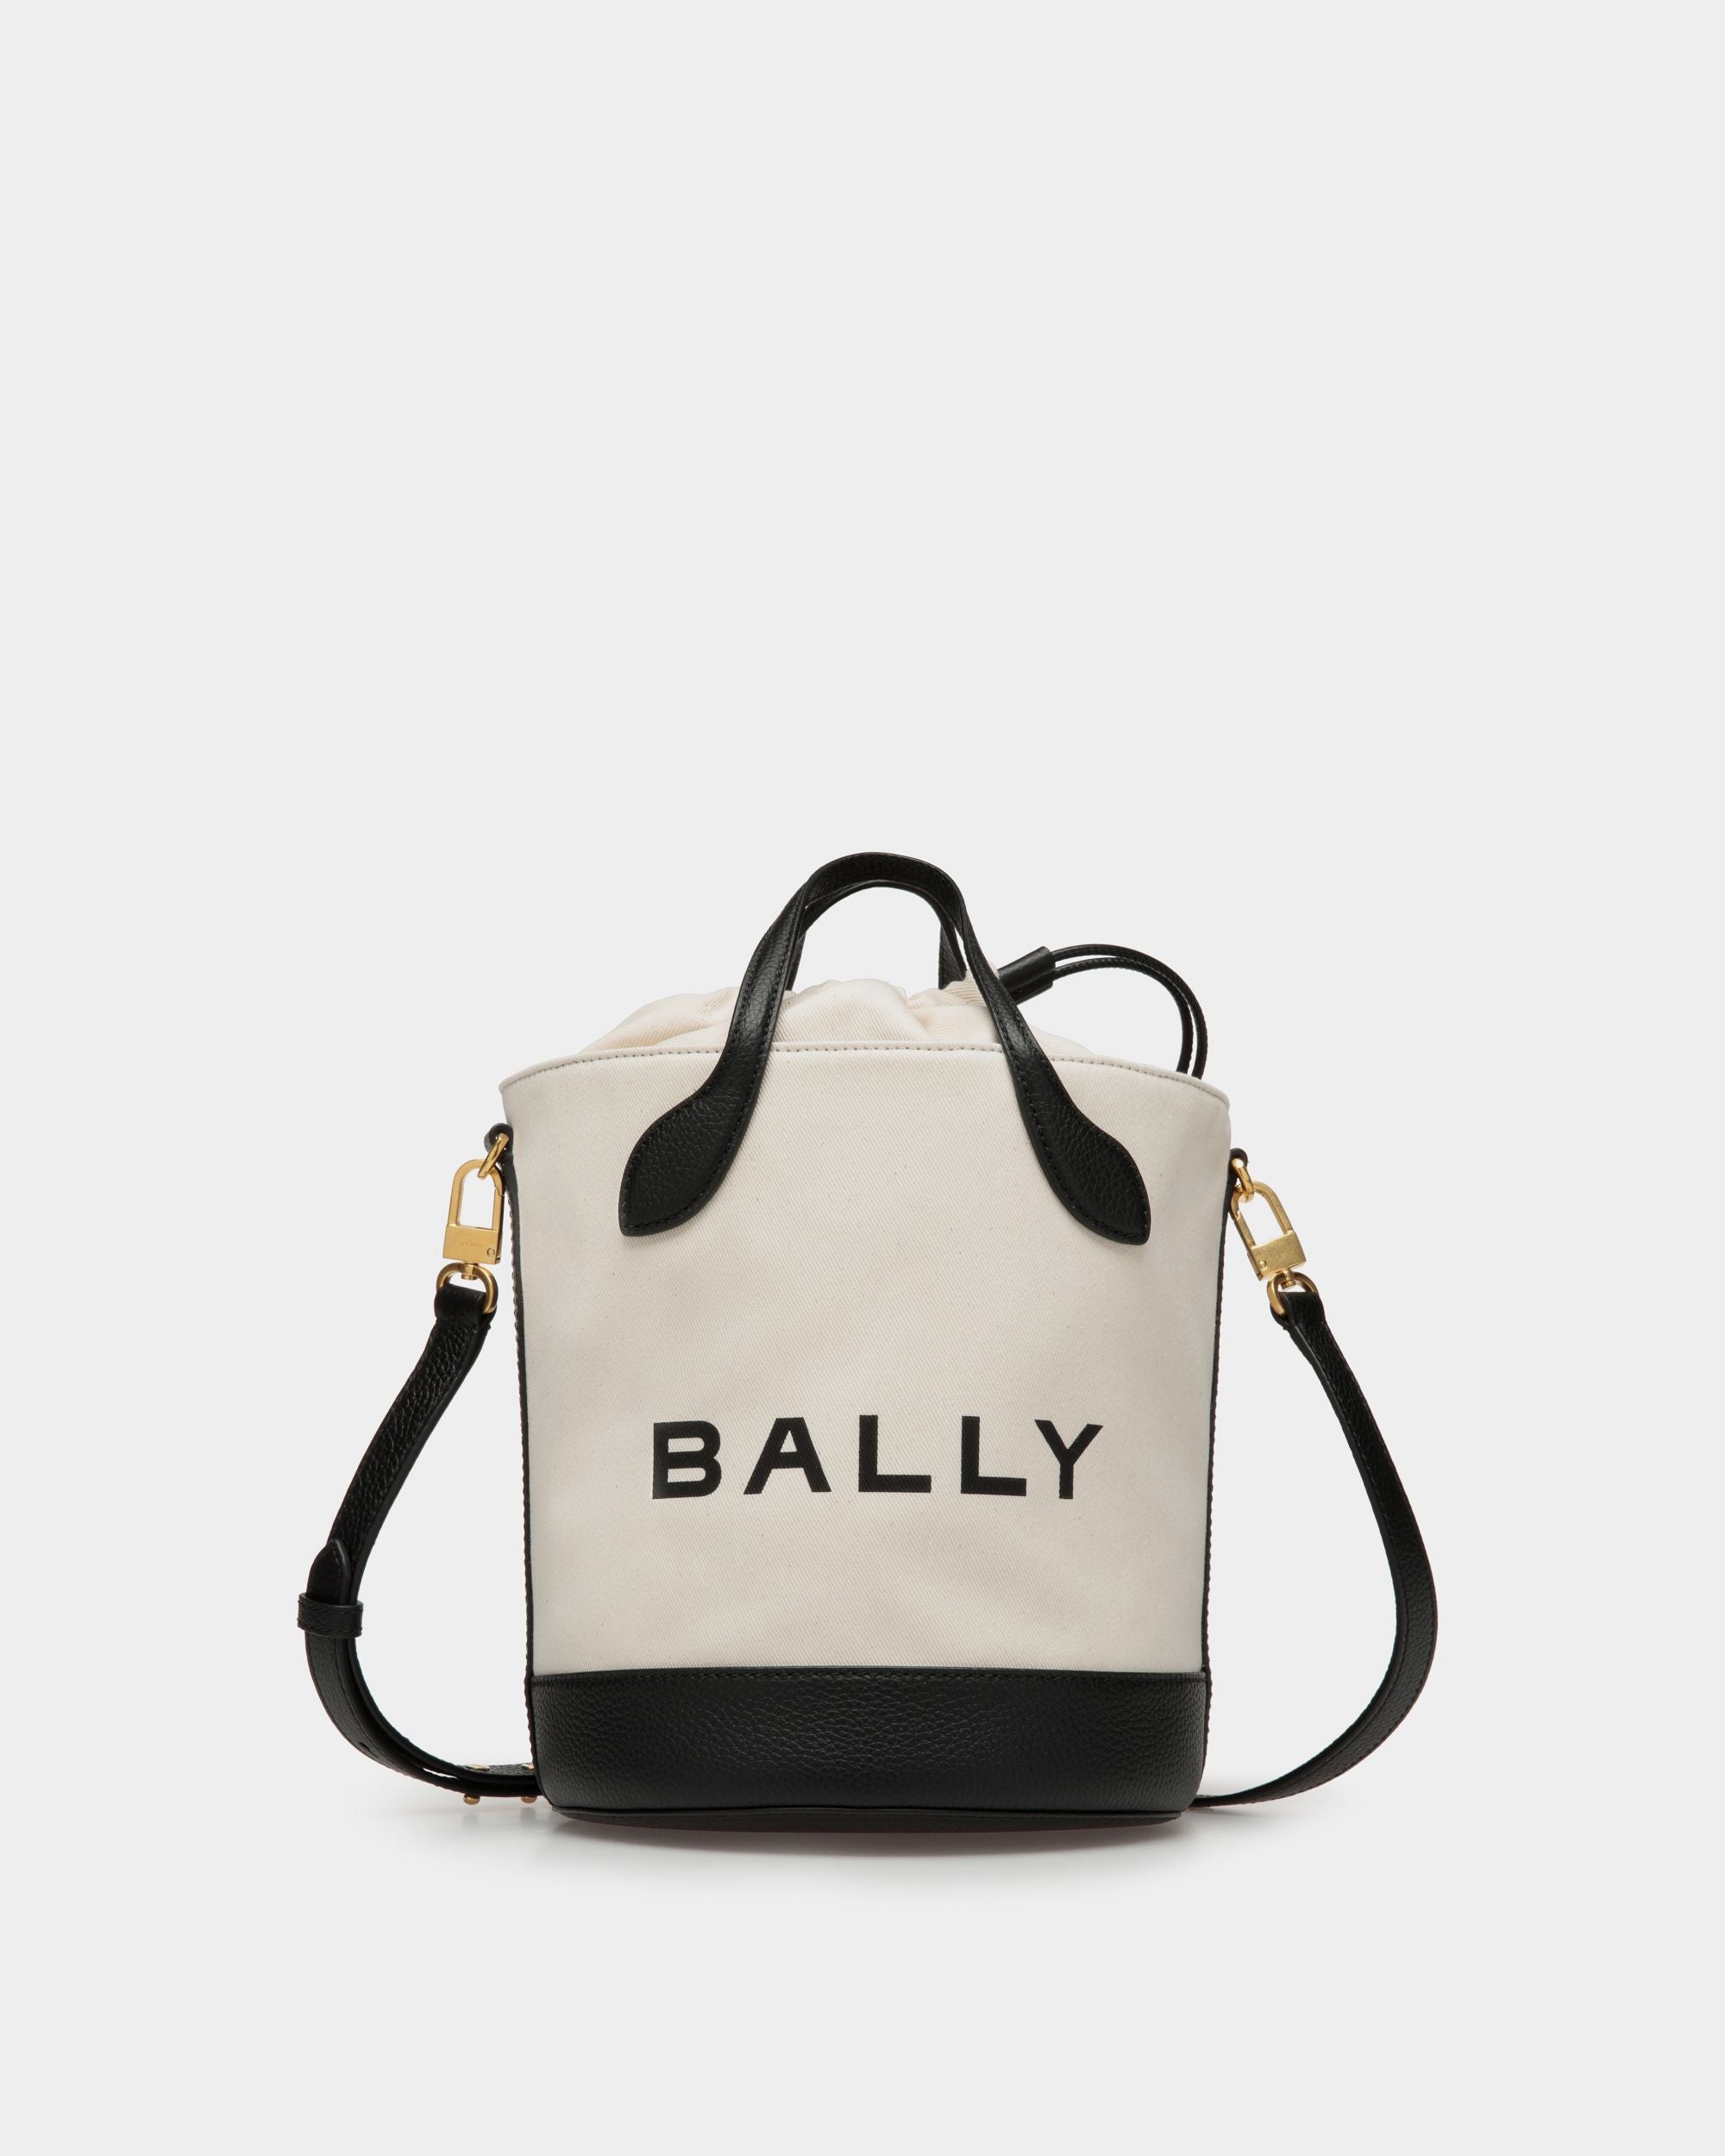 Bar 8 Hours | Women's Bucket Bag | Natural And Black Fabric | Bally | Still Life Front